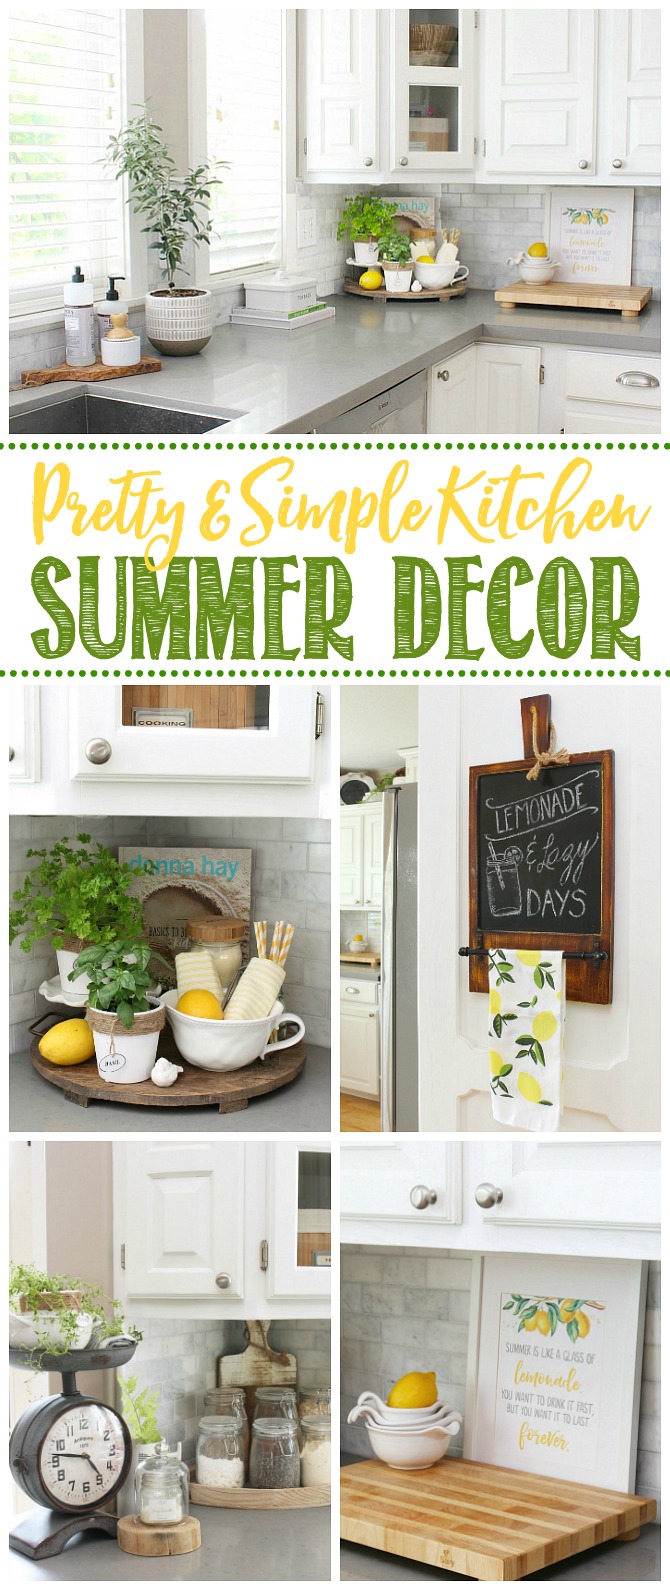 Collage of simple summer kitchen decor ideas with greens and yellows.